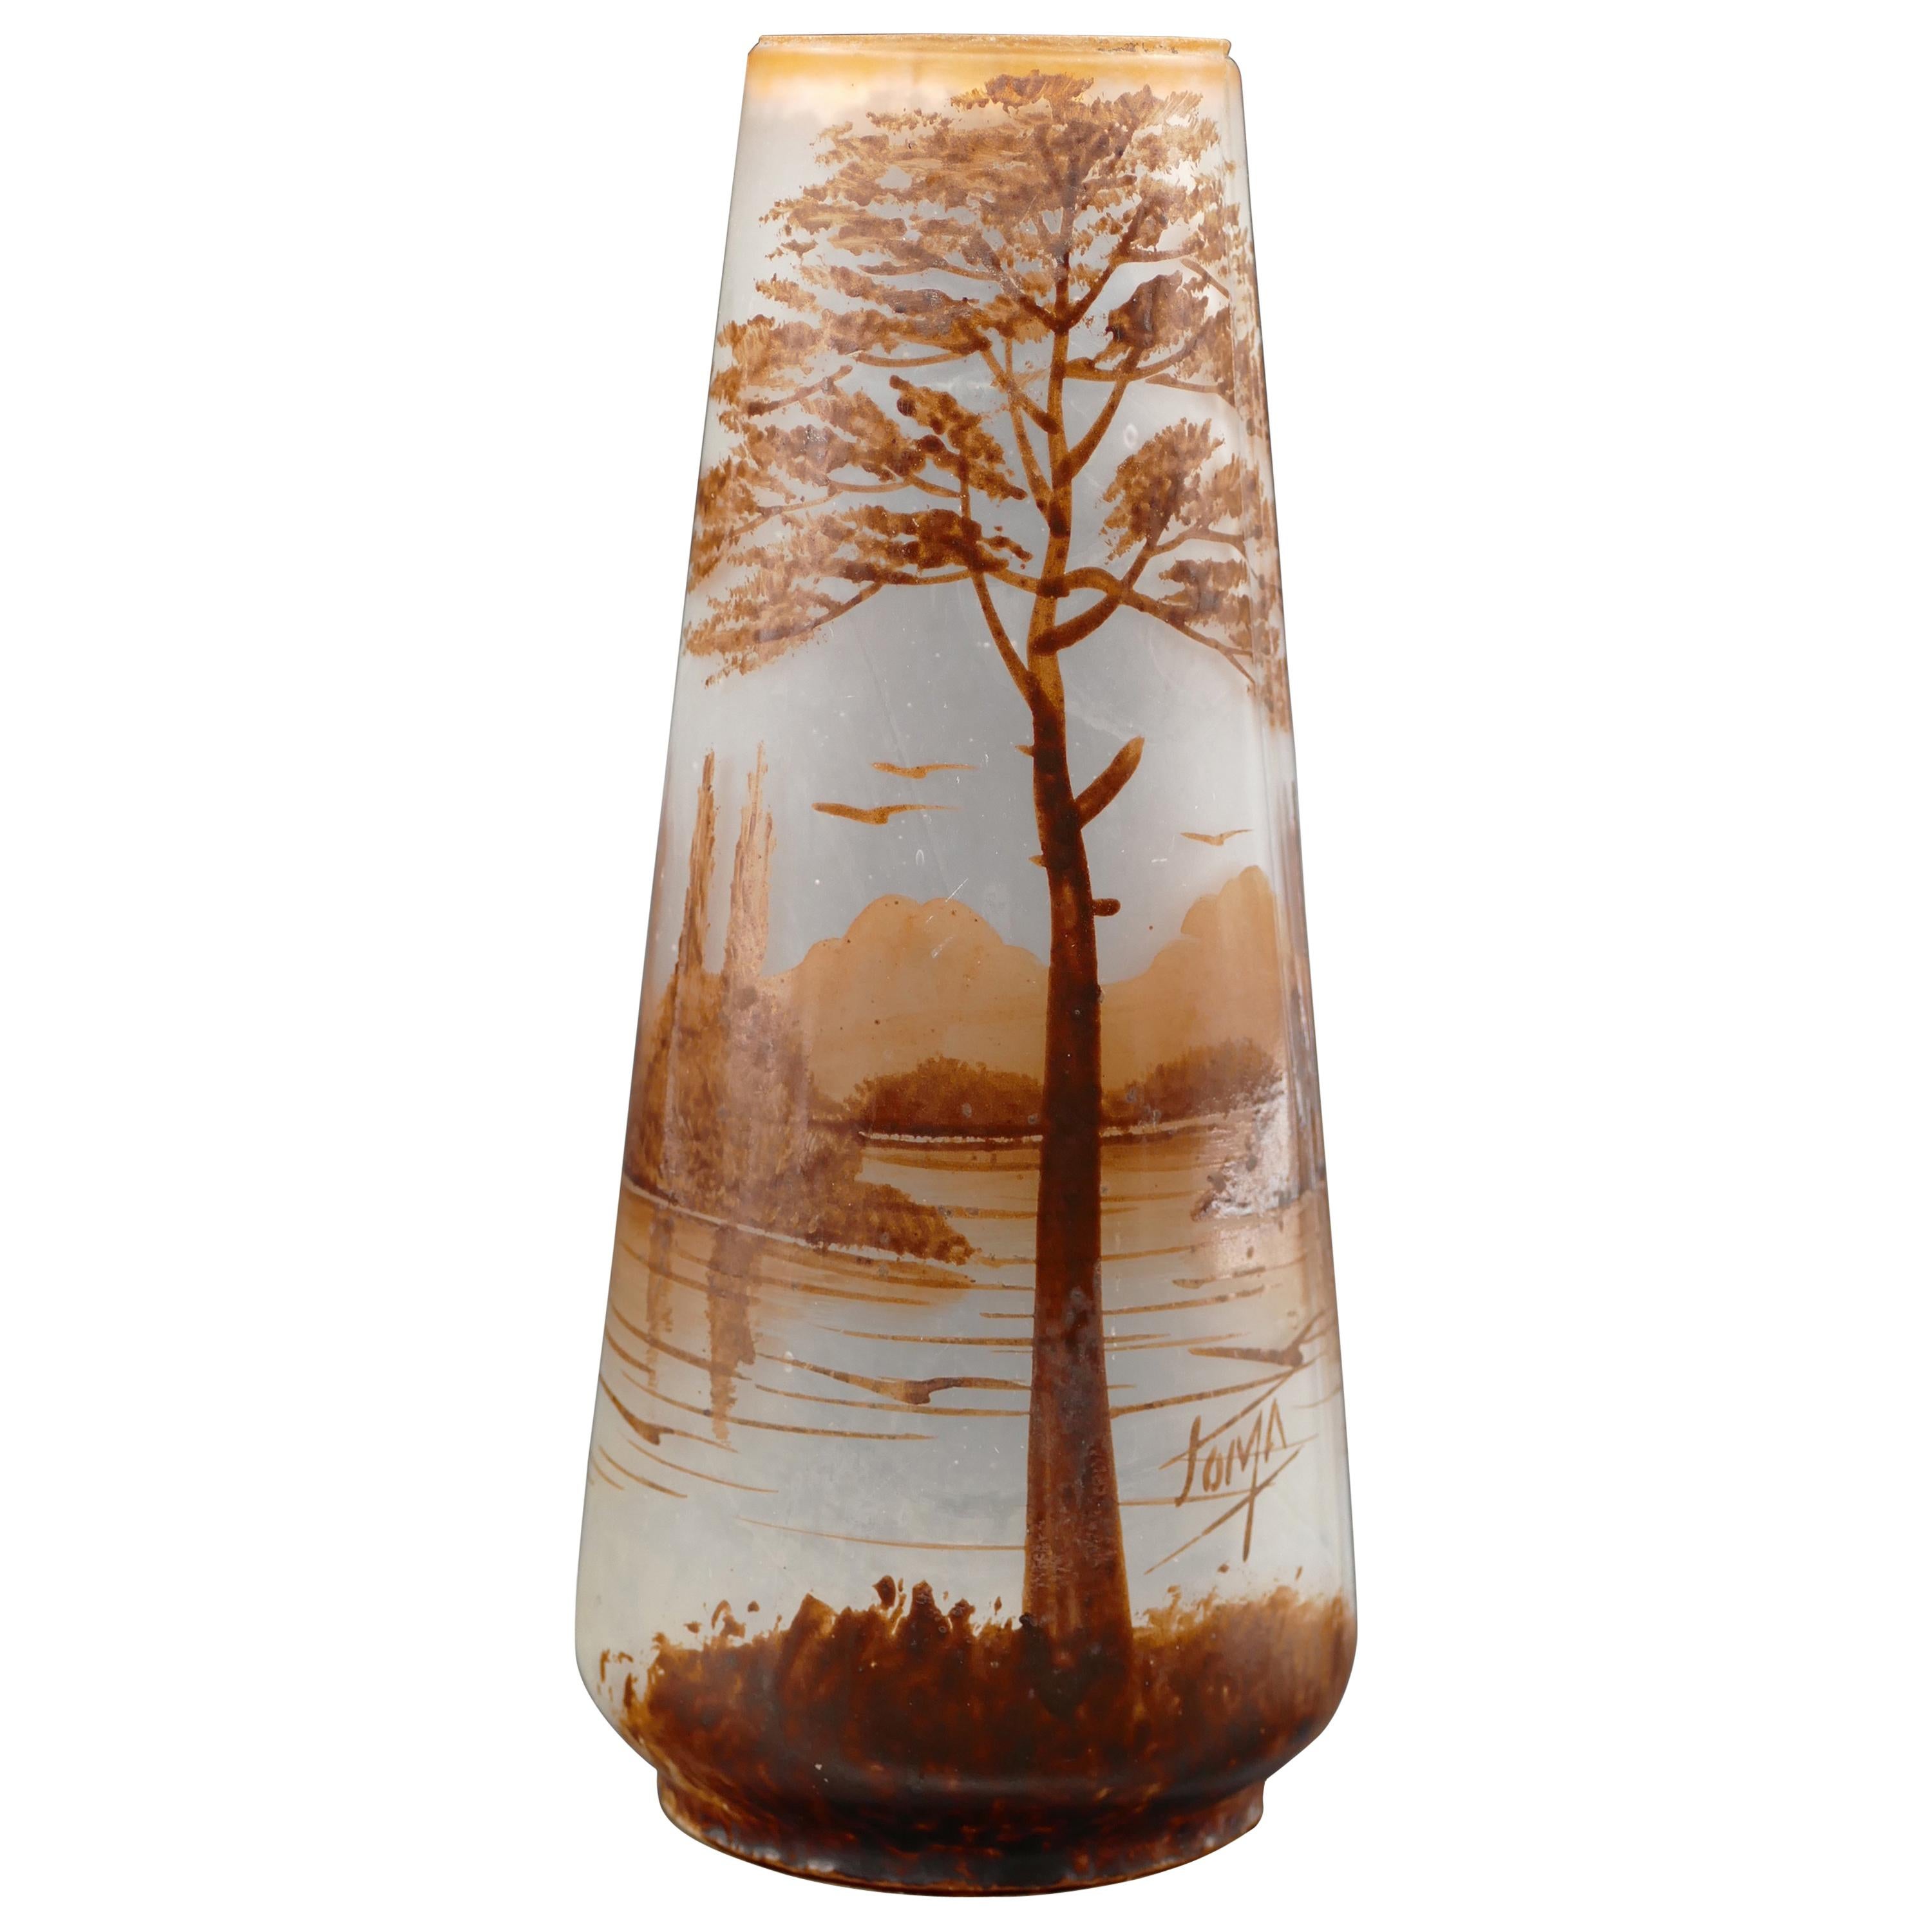 Art Nouveau Marine Escape Vase by Joma, Montreuil, France, Early 1900 For Sale